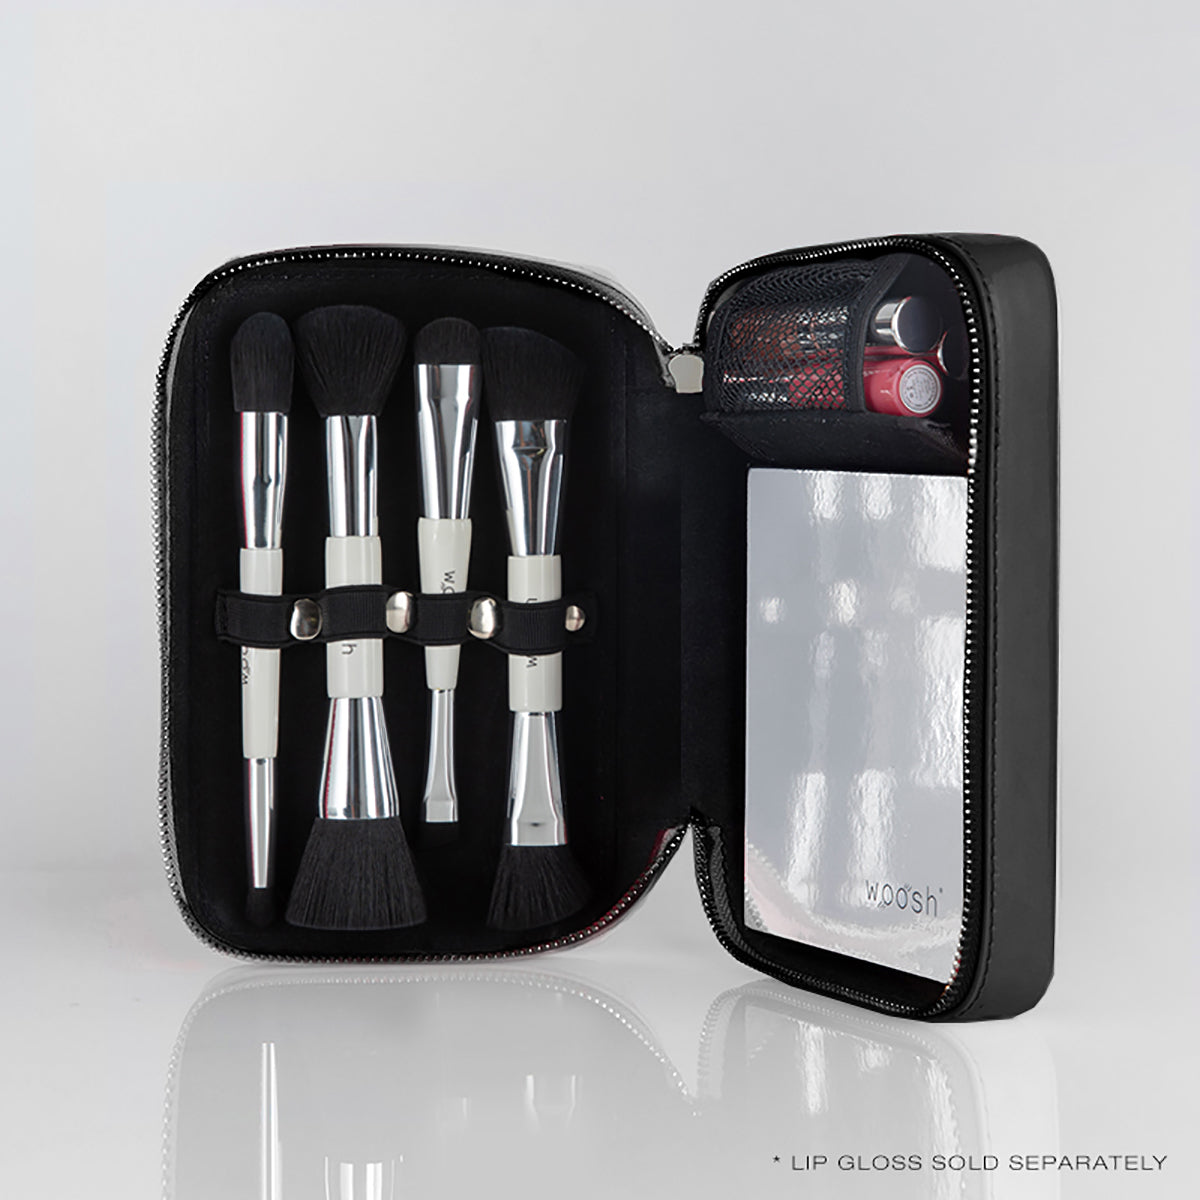 Black Fold Out Case can hold: 4 essential brushes, 3 lip glosses, and 1 fold out face palette. Has adjustable elastic straps that snap into place to make it easy to add brushes of different sizes. Has a mesh pocket perfect for holding spare makeup you need on the go.